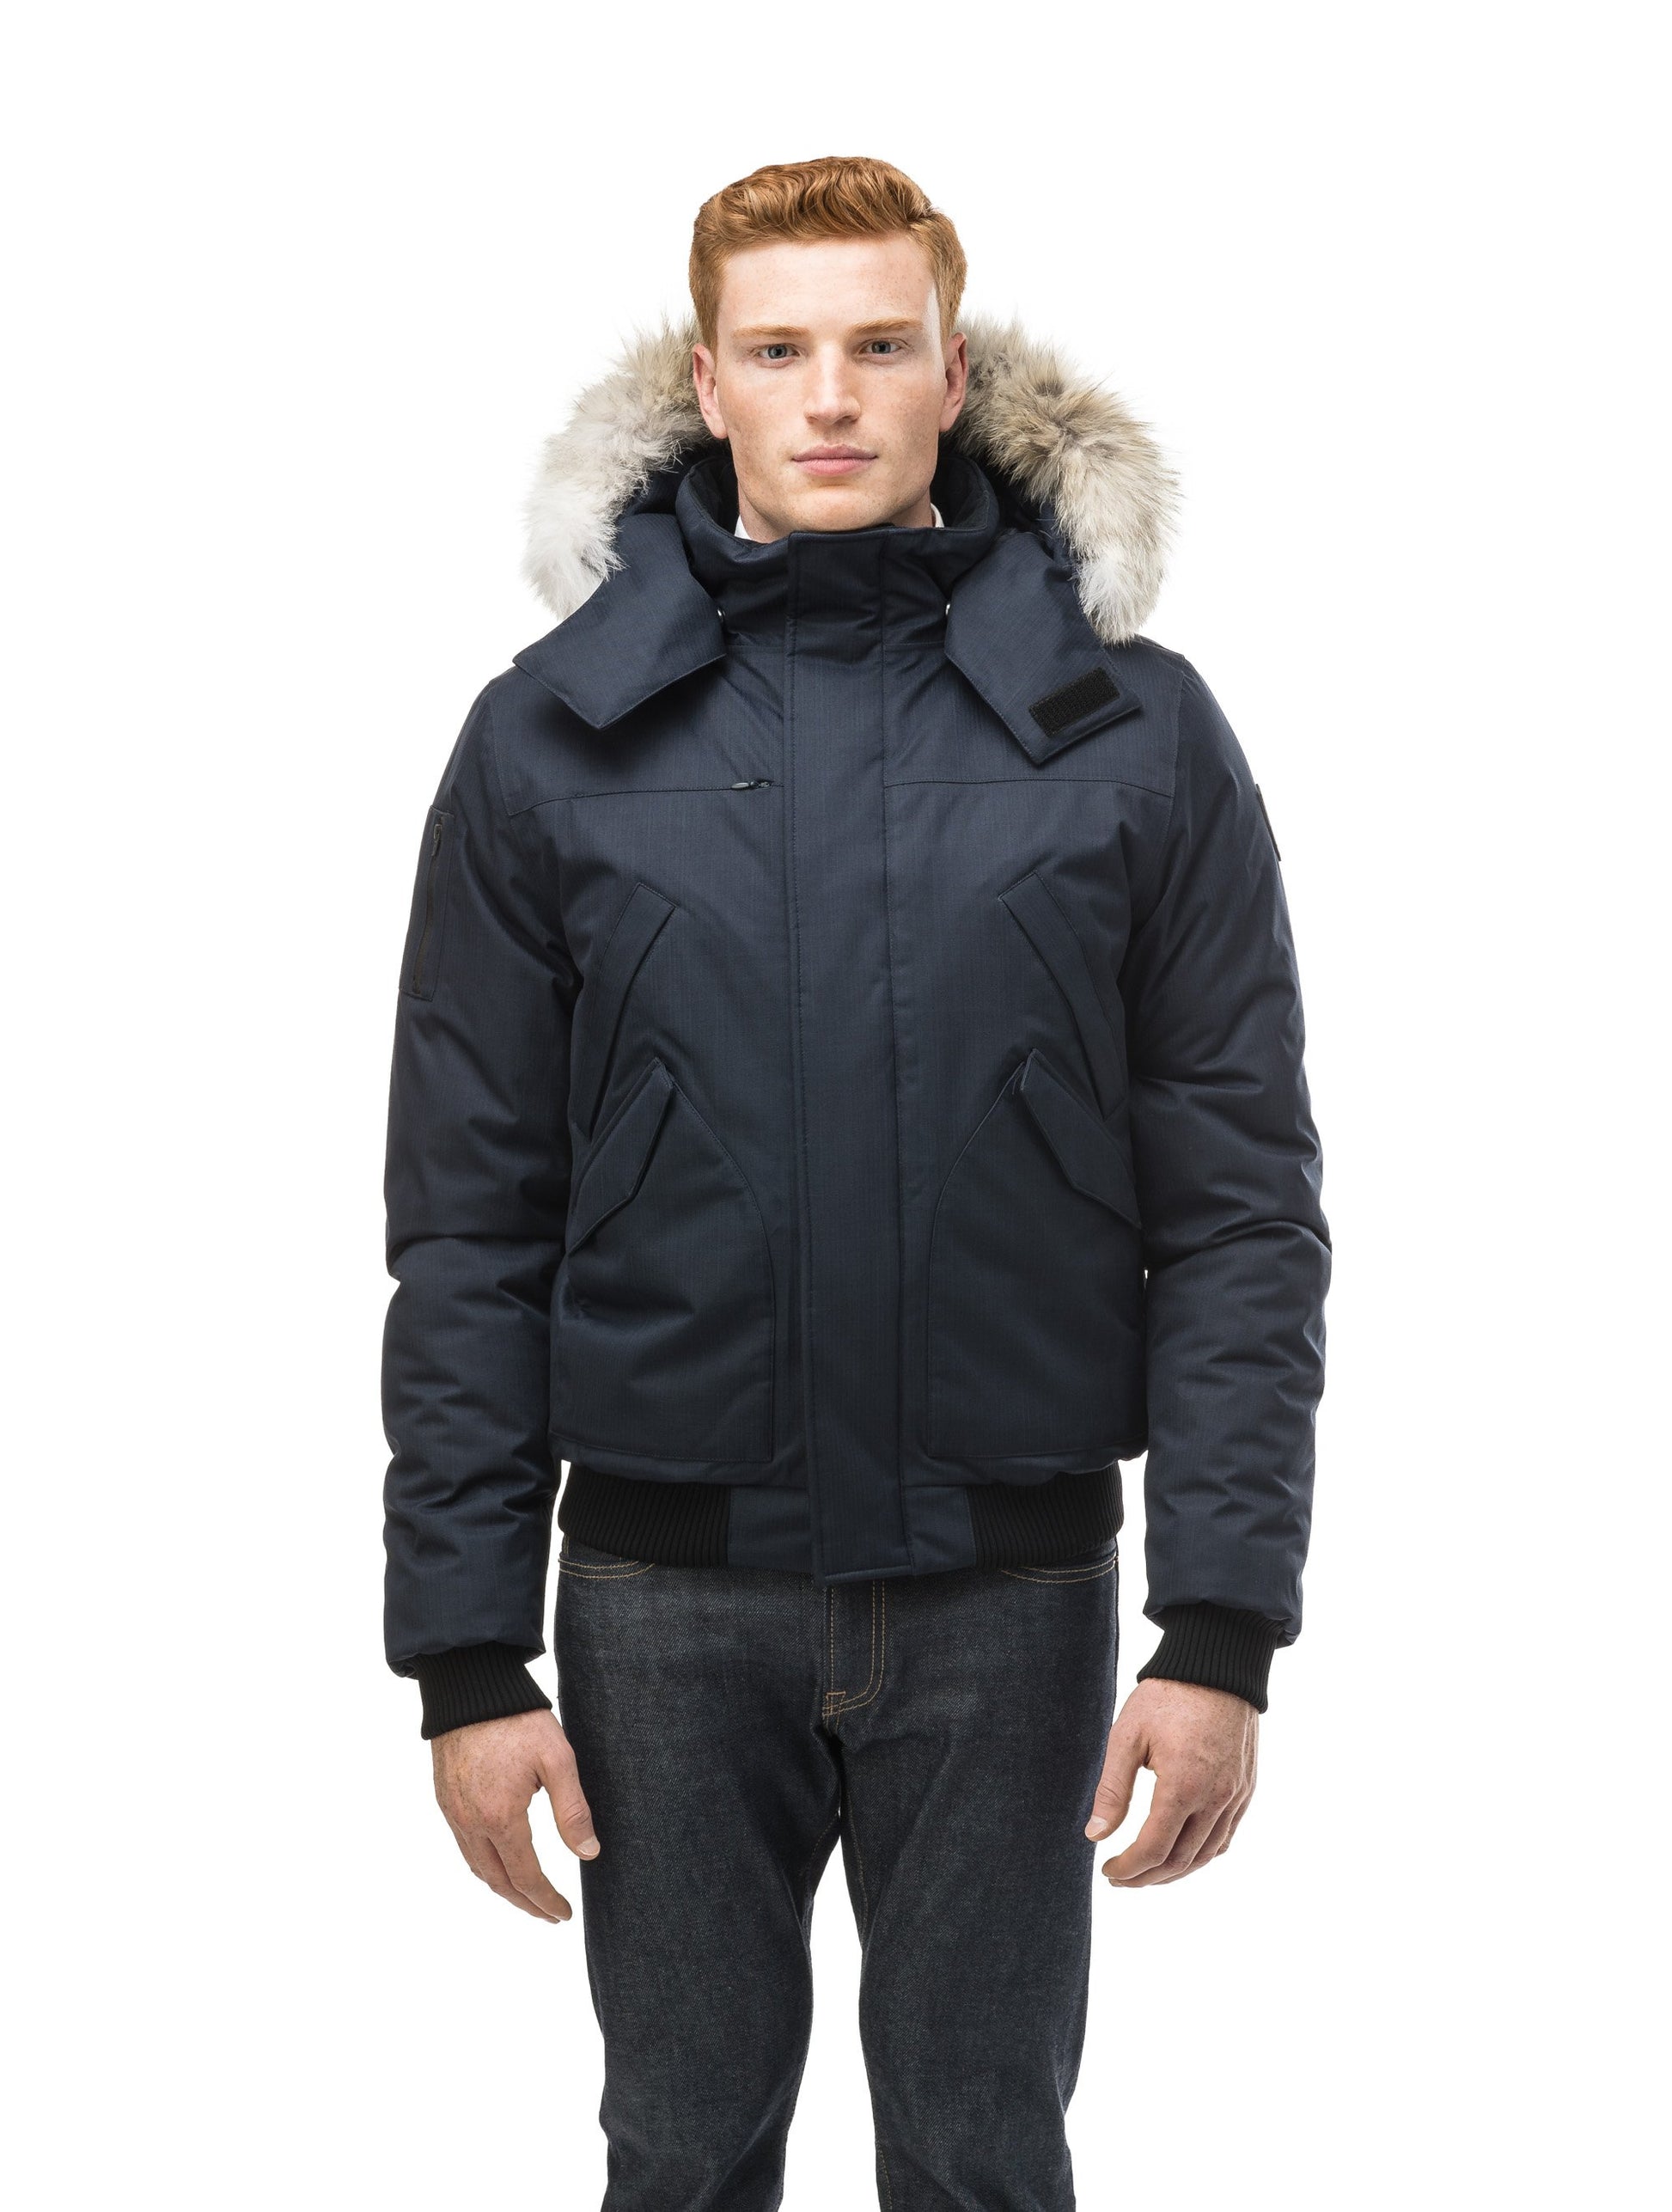 Men's classic down filled bomber jacket with a down filledÃ‚Â hood that features a removable coyote fur trim and concealed moldable framing wire in Navy